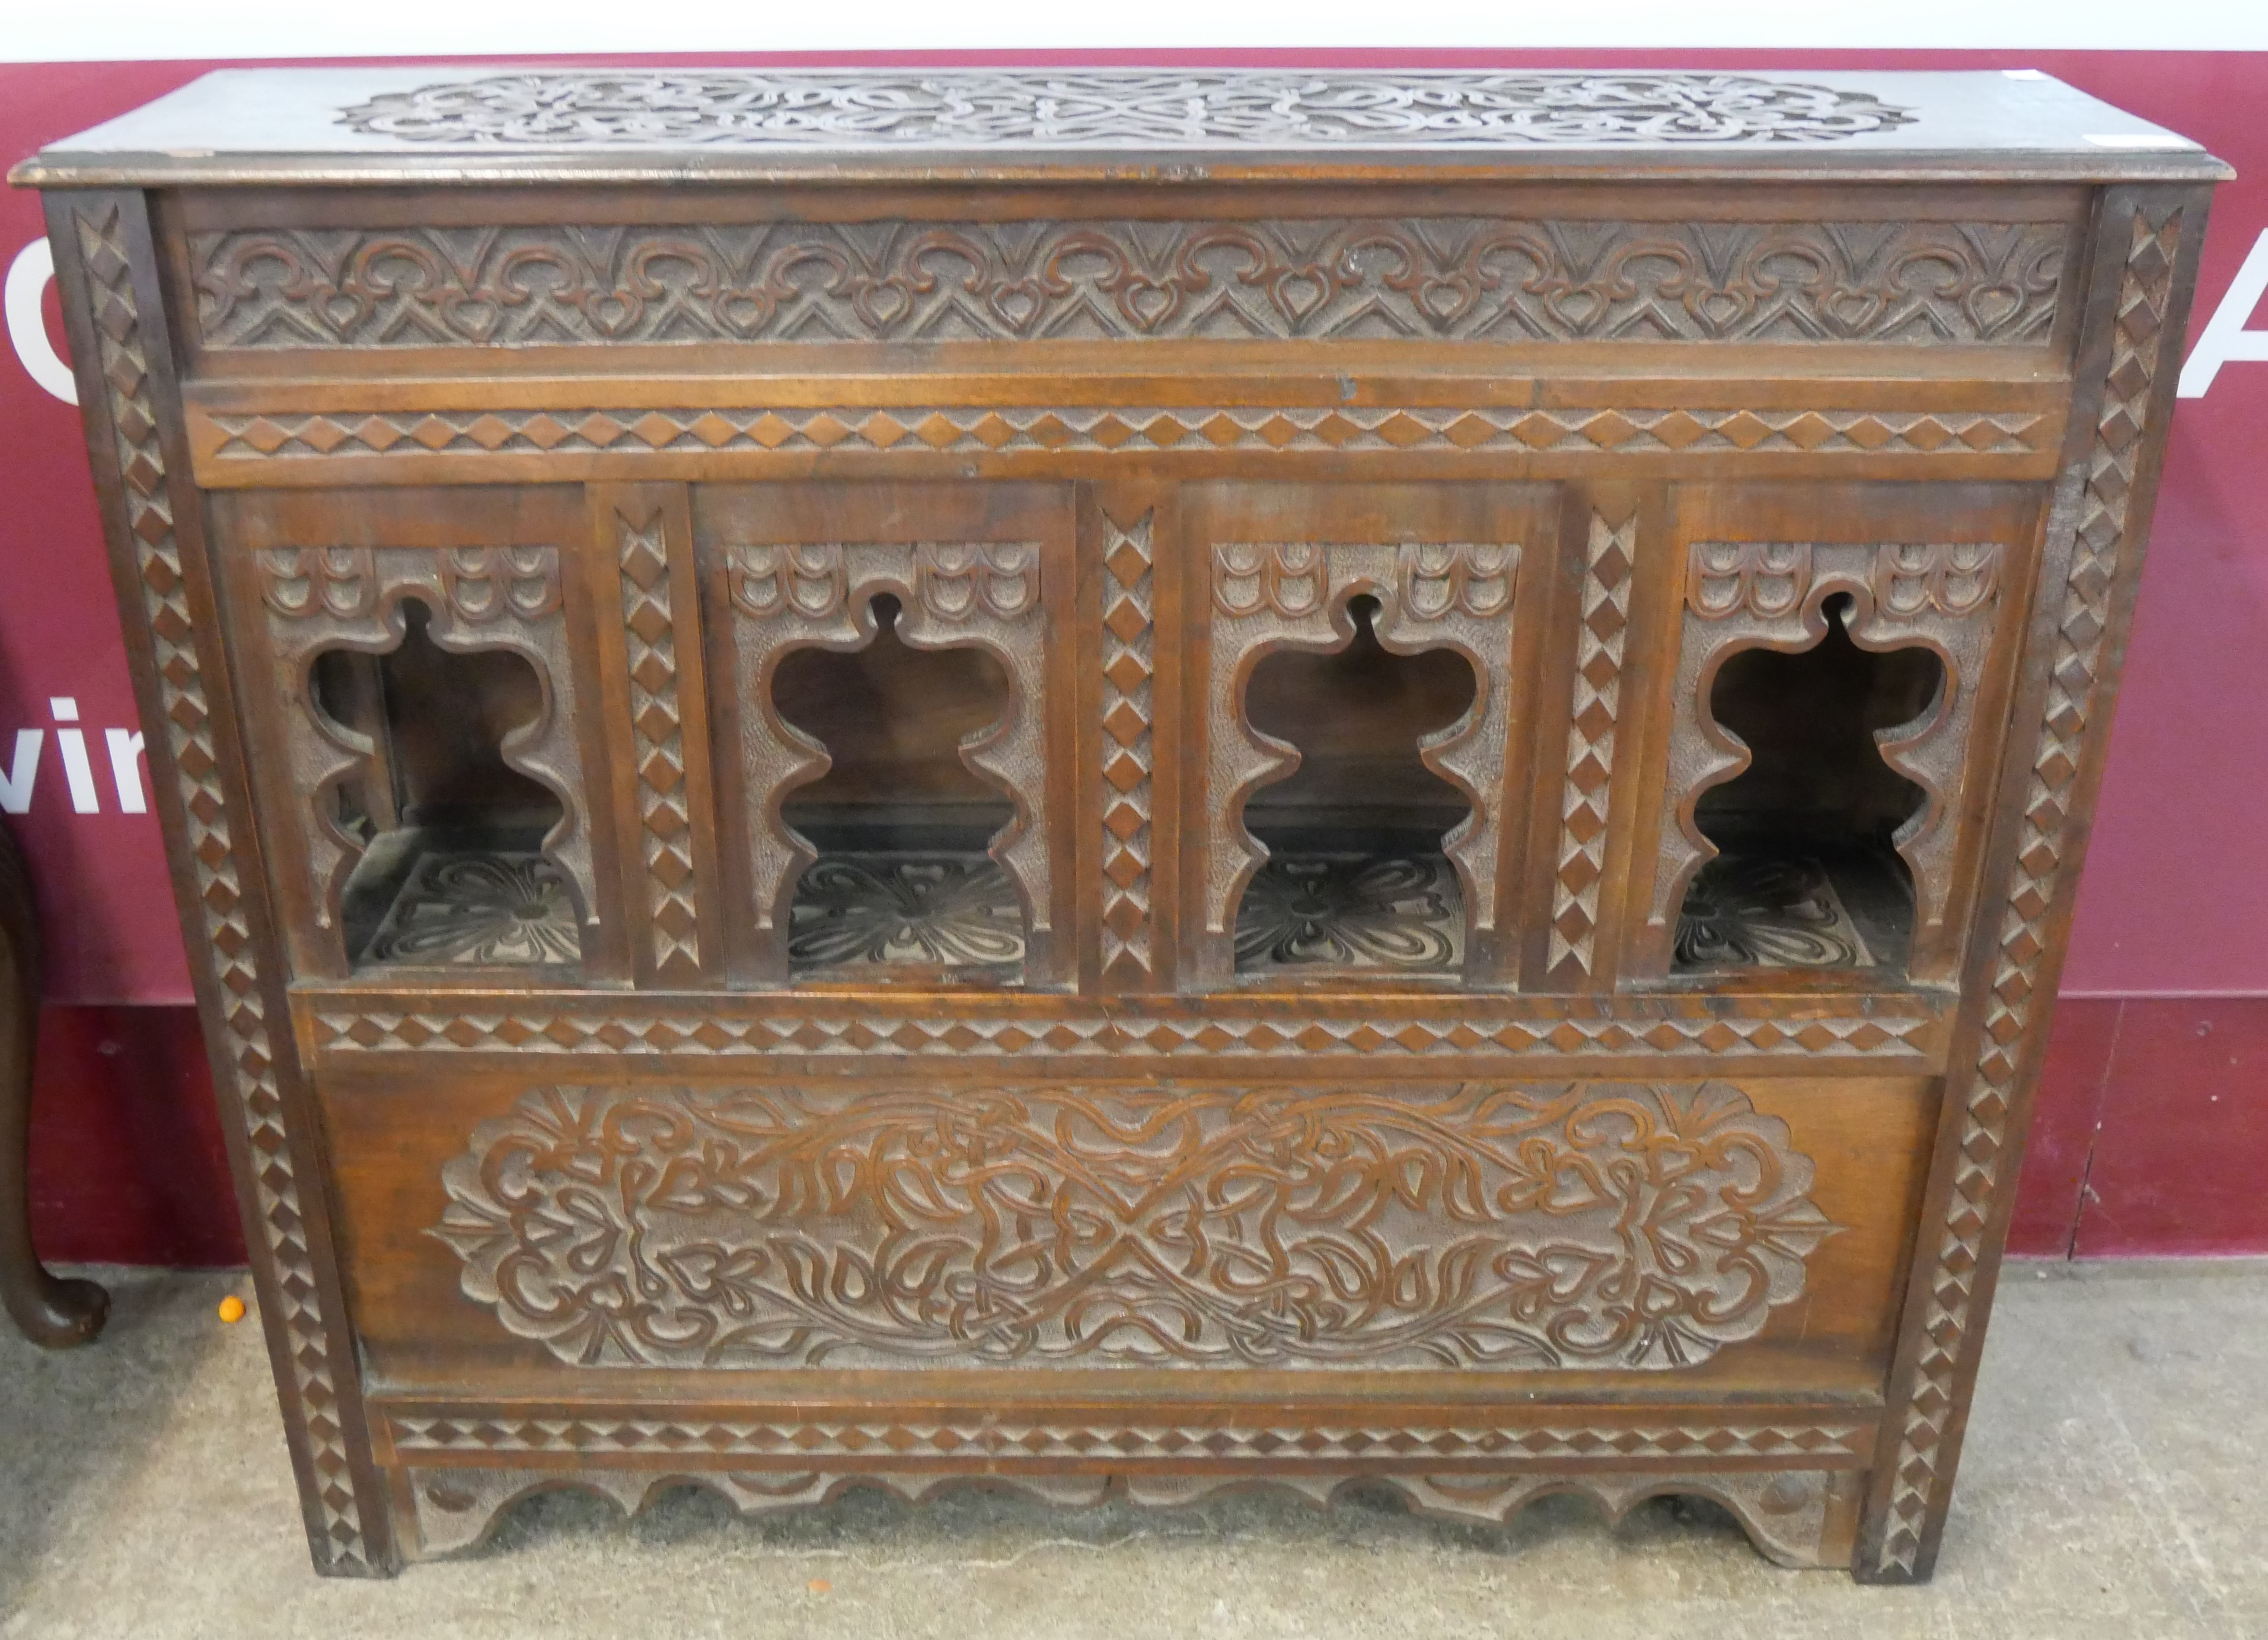 A 19th Century style Moorish carved hardwood console table